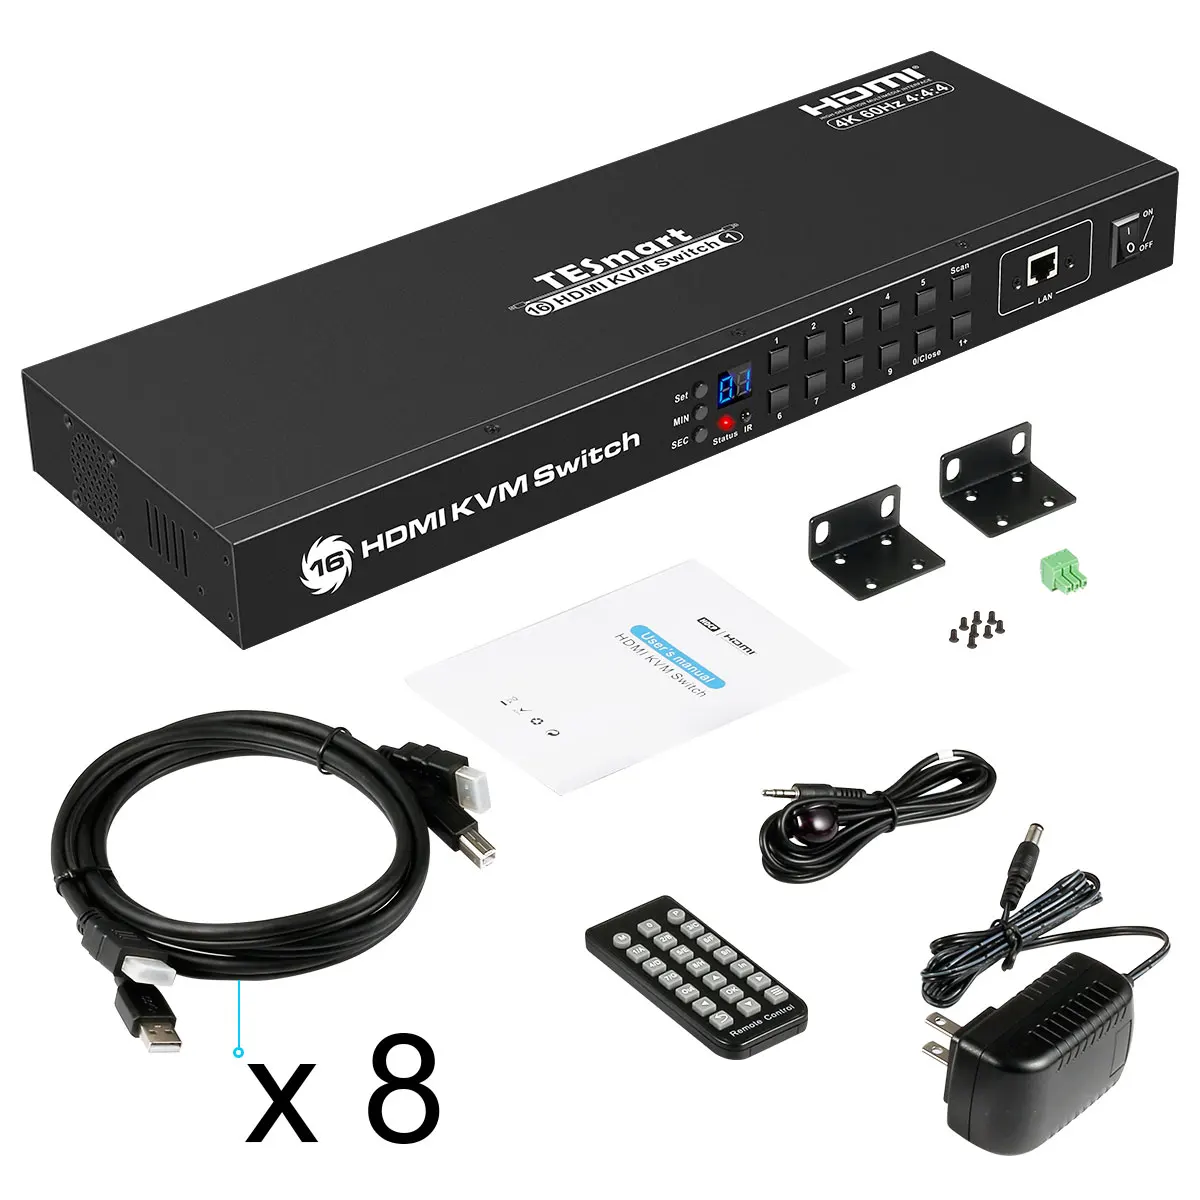 

HDMI KVM Switch 16x1 Support 3D 4K 60HZ RS232 16 In 1 Out EDID Emulators Audio Video HDMI Switcher With IR Remote